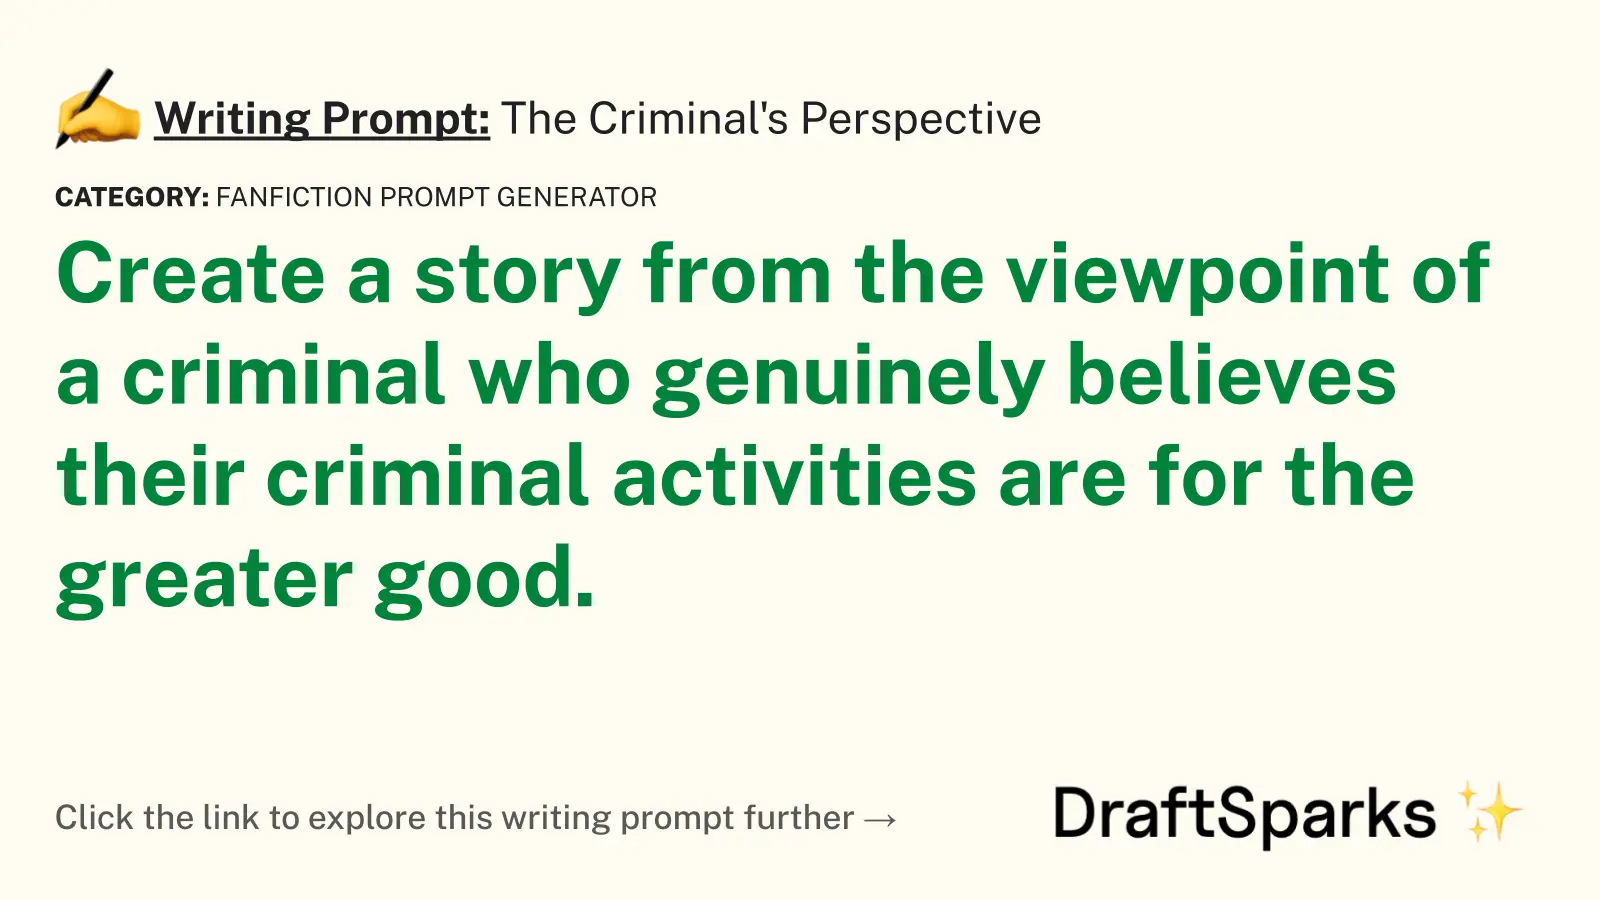 The Criminal’s Perspective